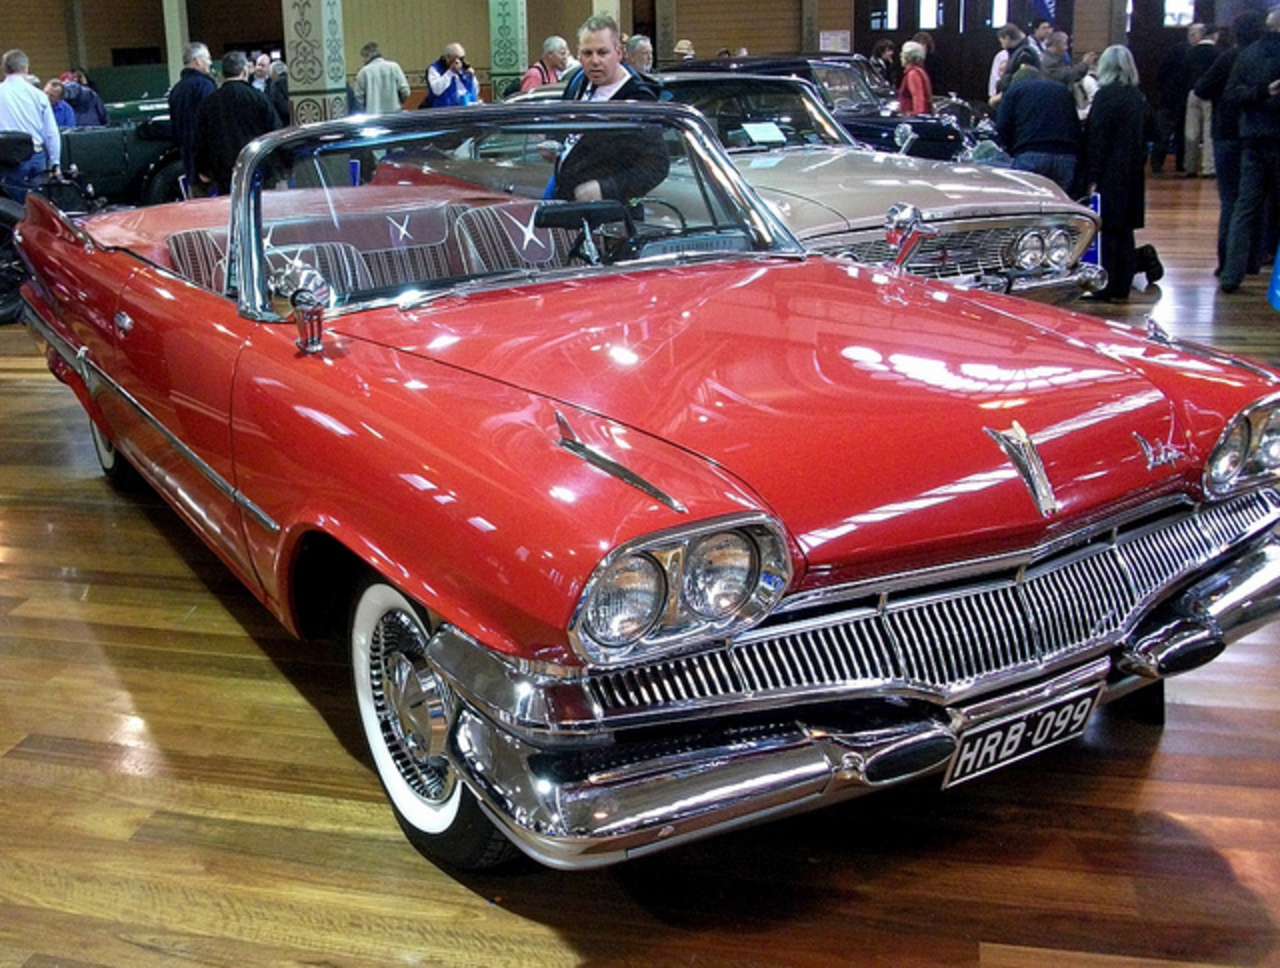 Lovely Red Dodge convertible. | Flickr - Photo Sharing!